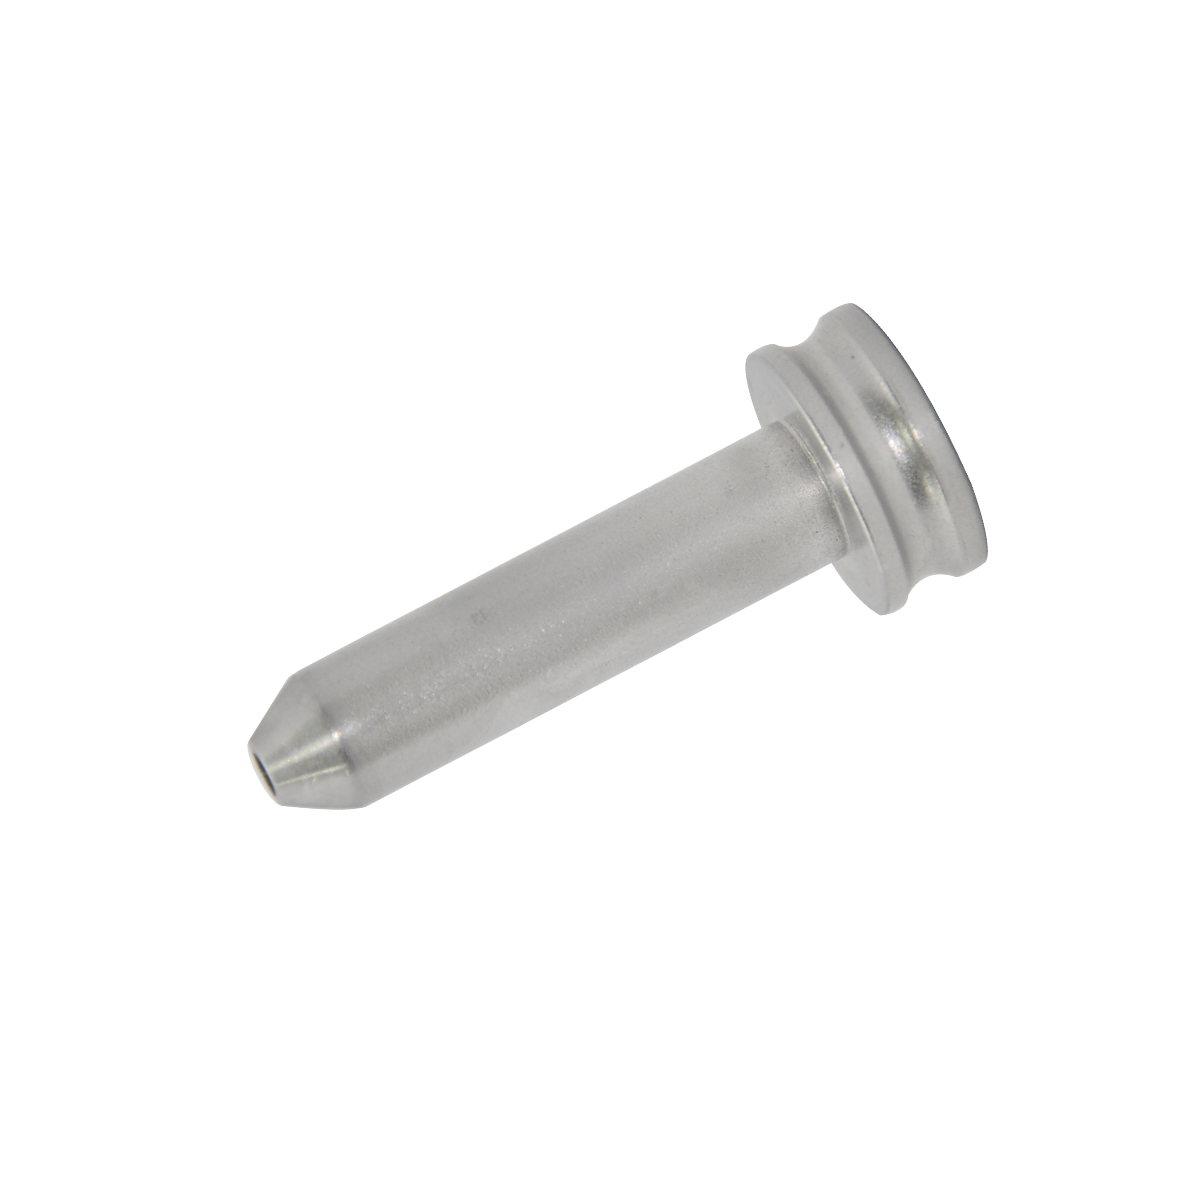 Drill Sleeve for 2.2mm Drill Bit